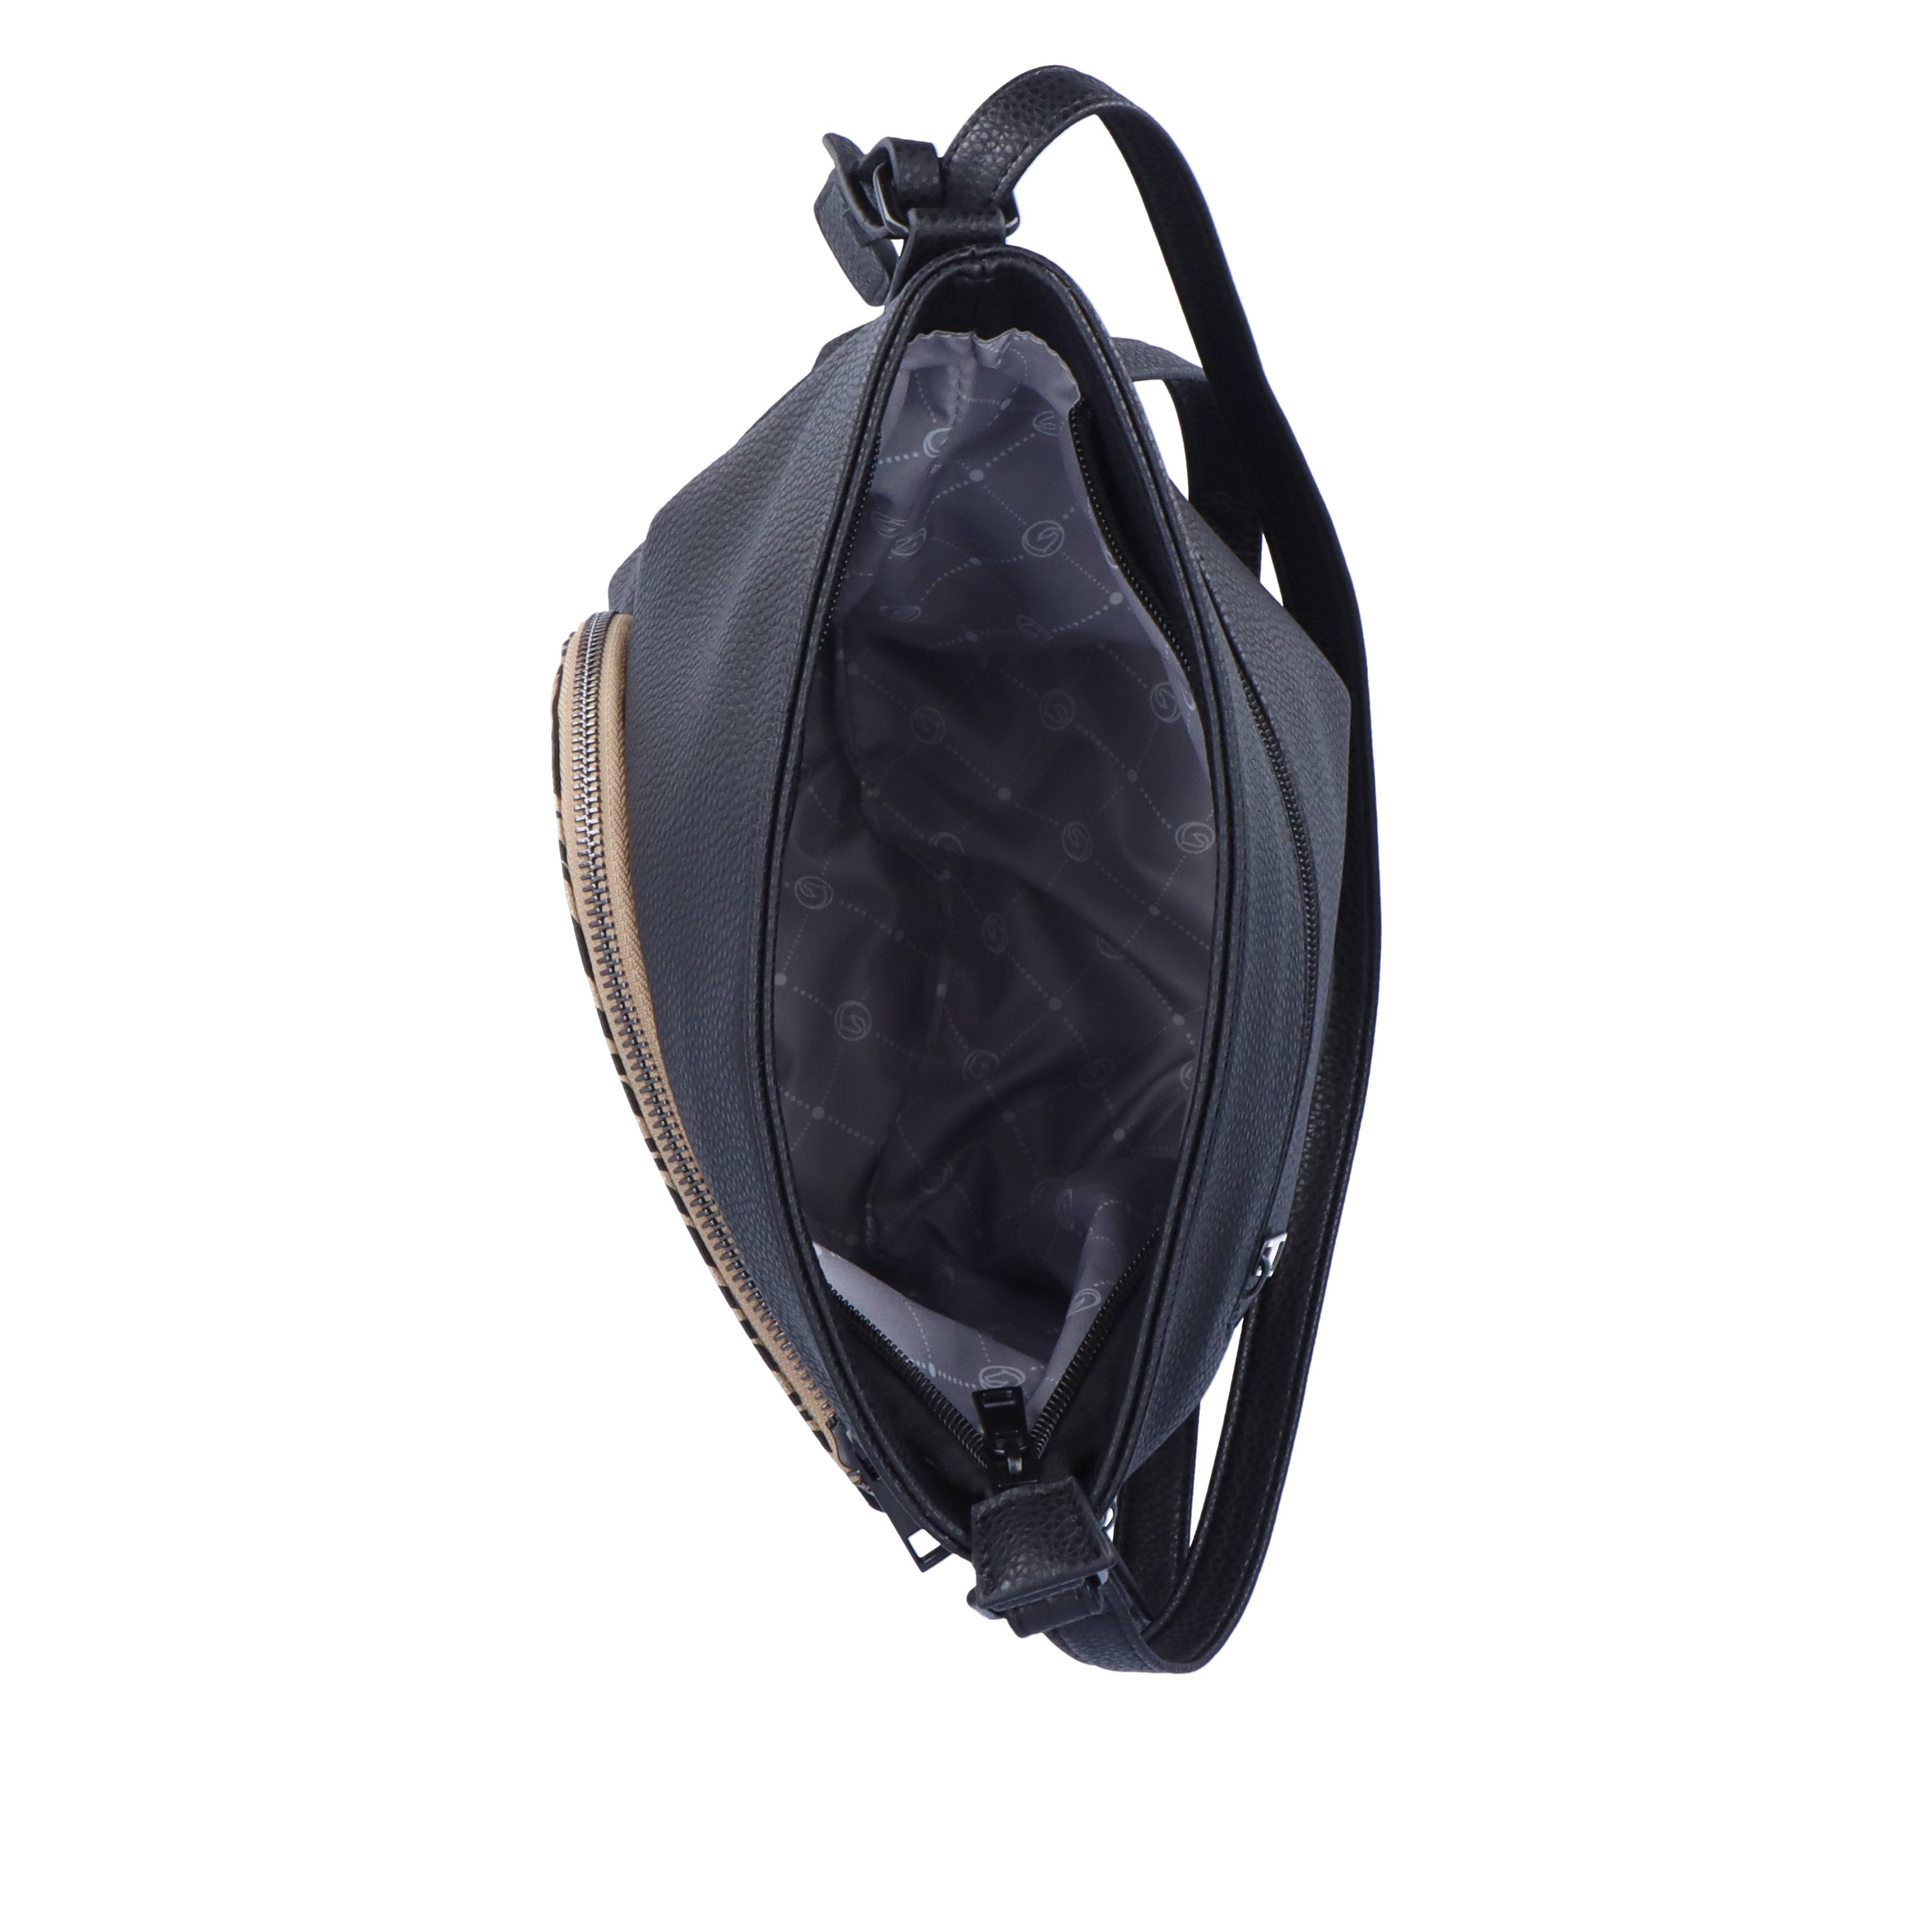 remonte women´s bag Q0705-03 in black-beige made of imitation leather with zipper from the top.